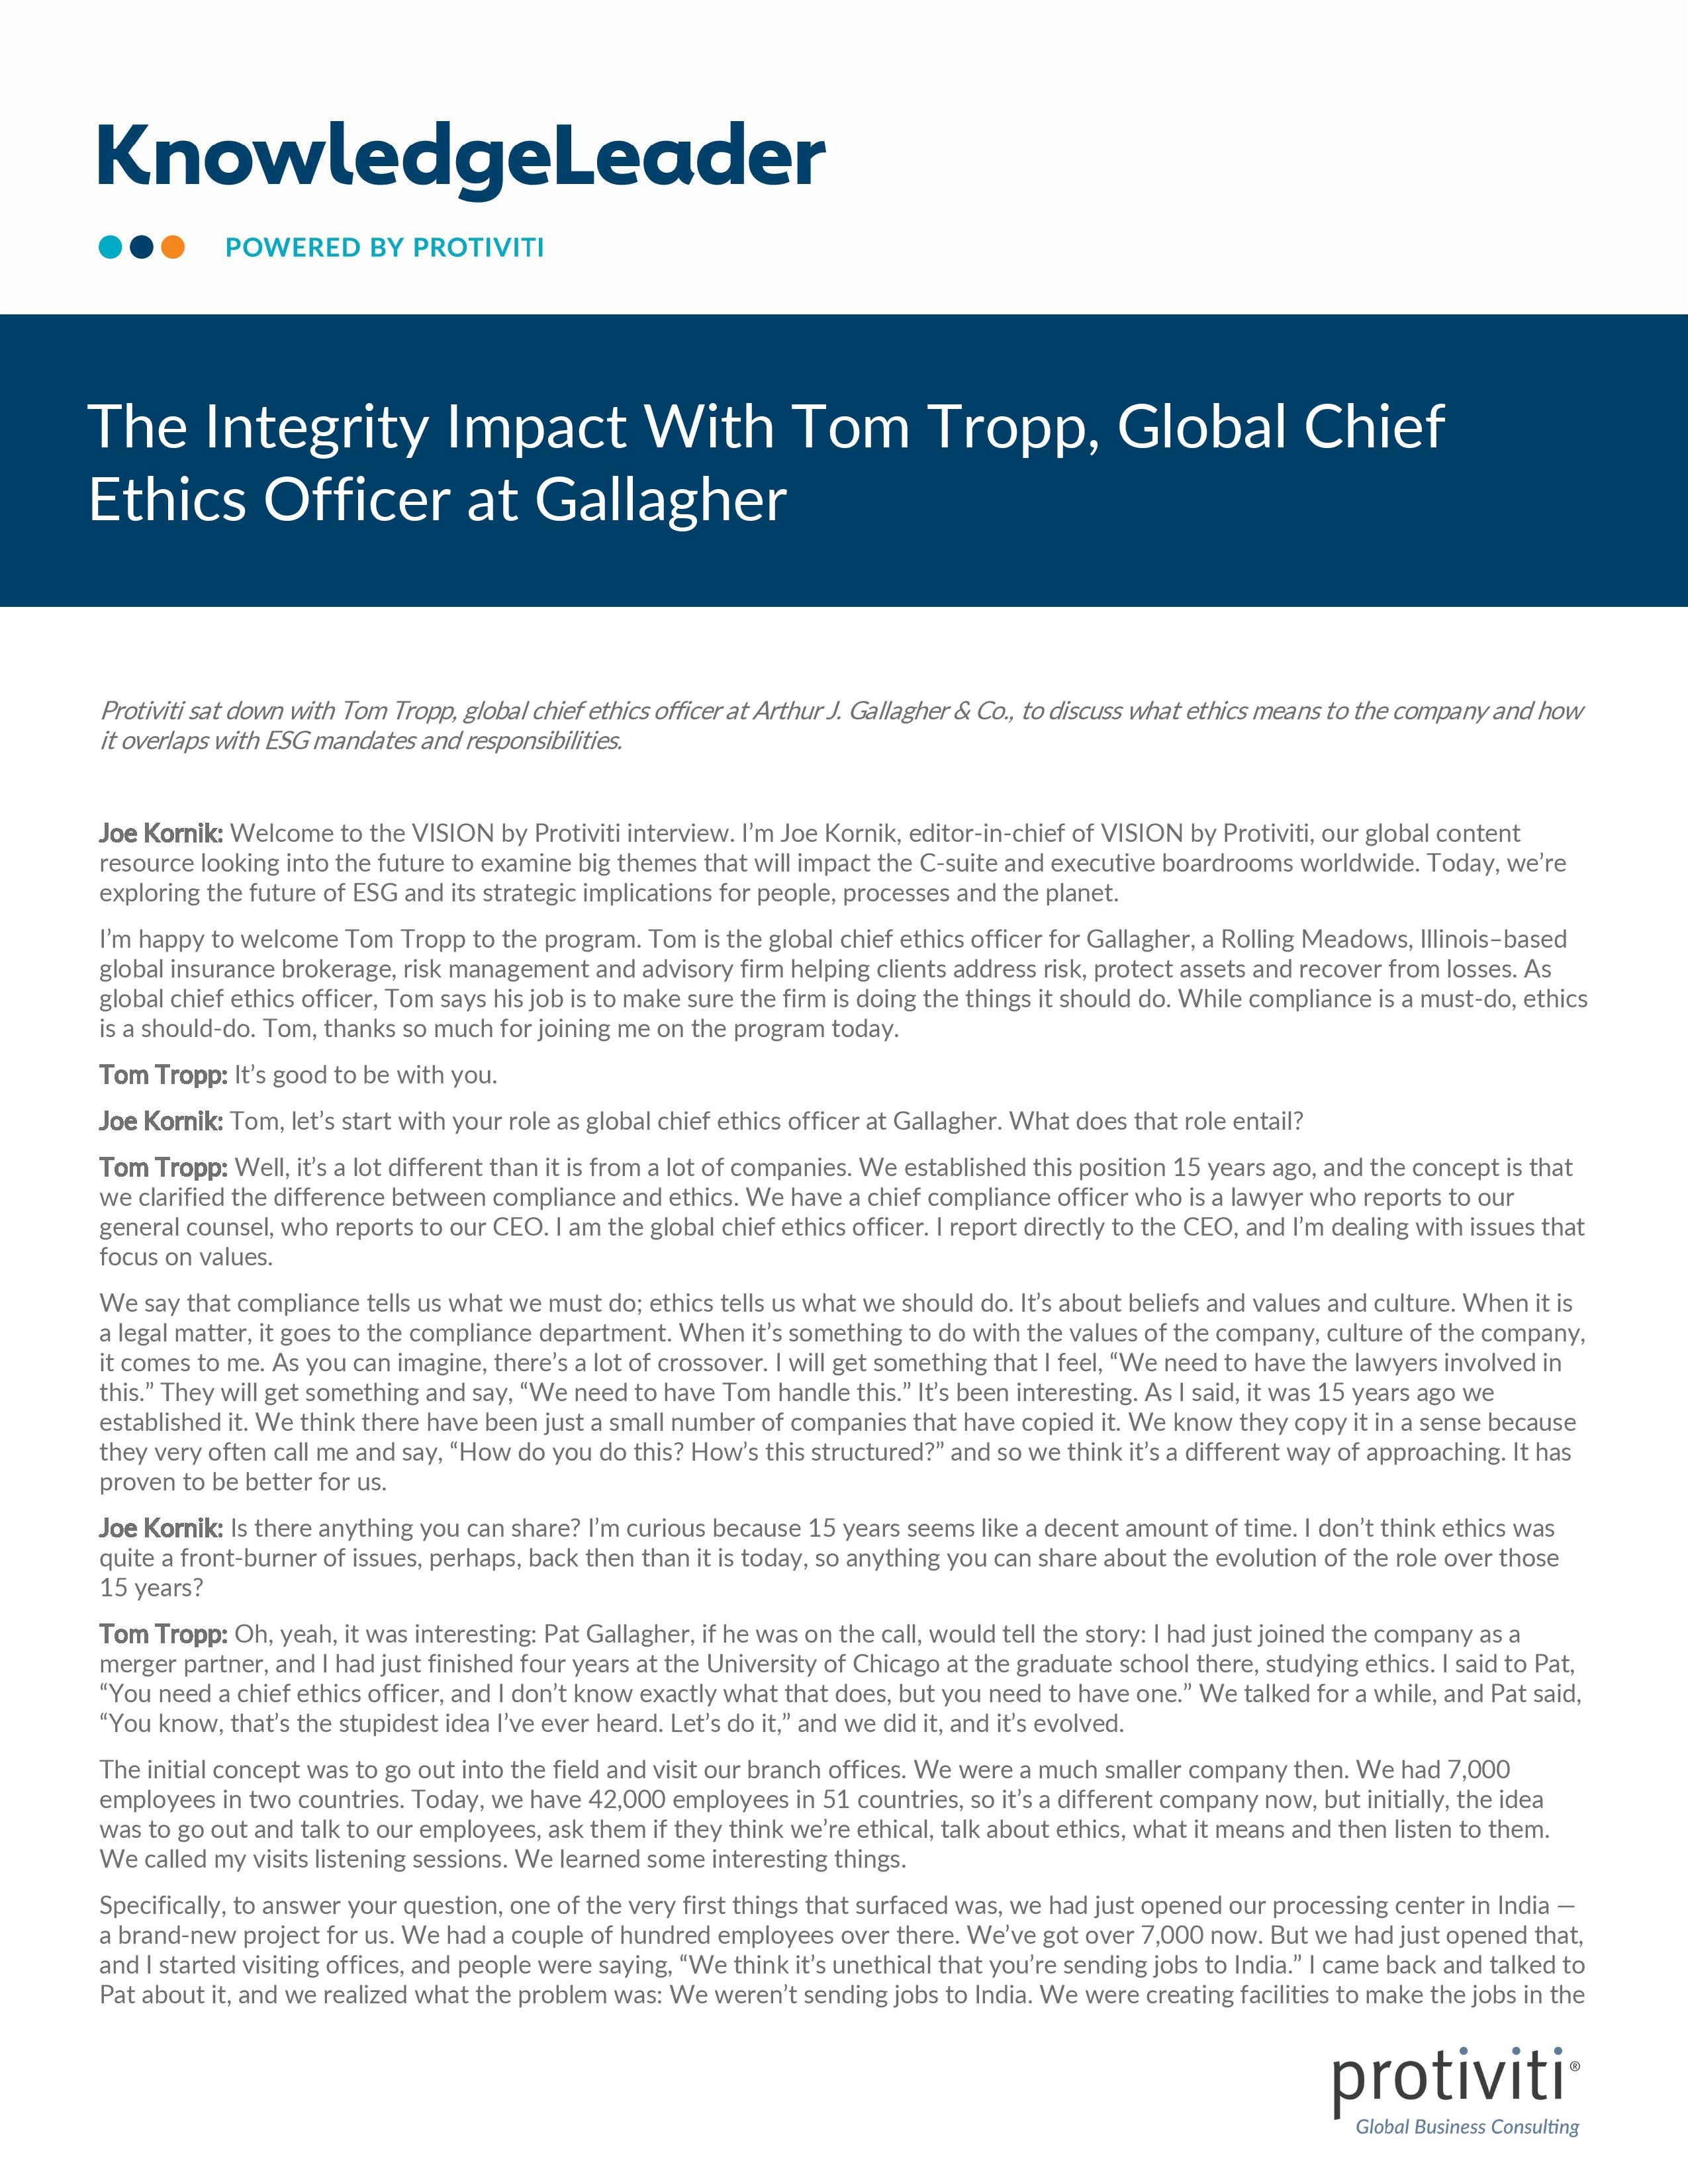 Screenshot of the First Page of The Integrity Impact With Tom Tropp, Global Chief Ethics Officer at Gallagher